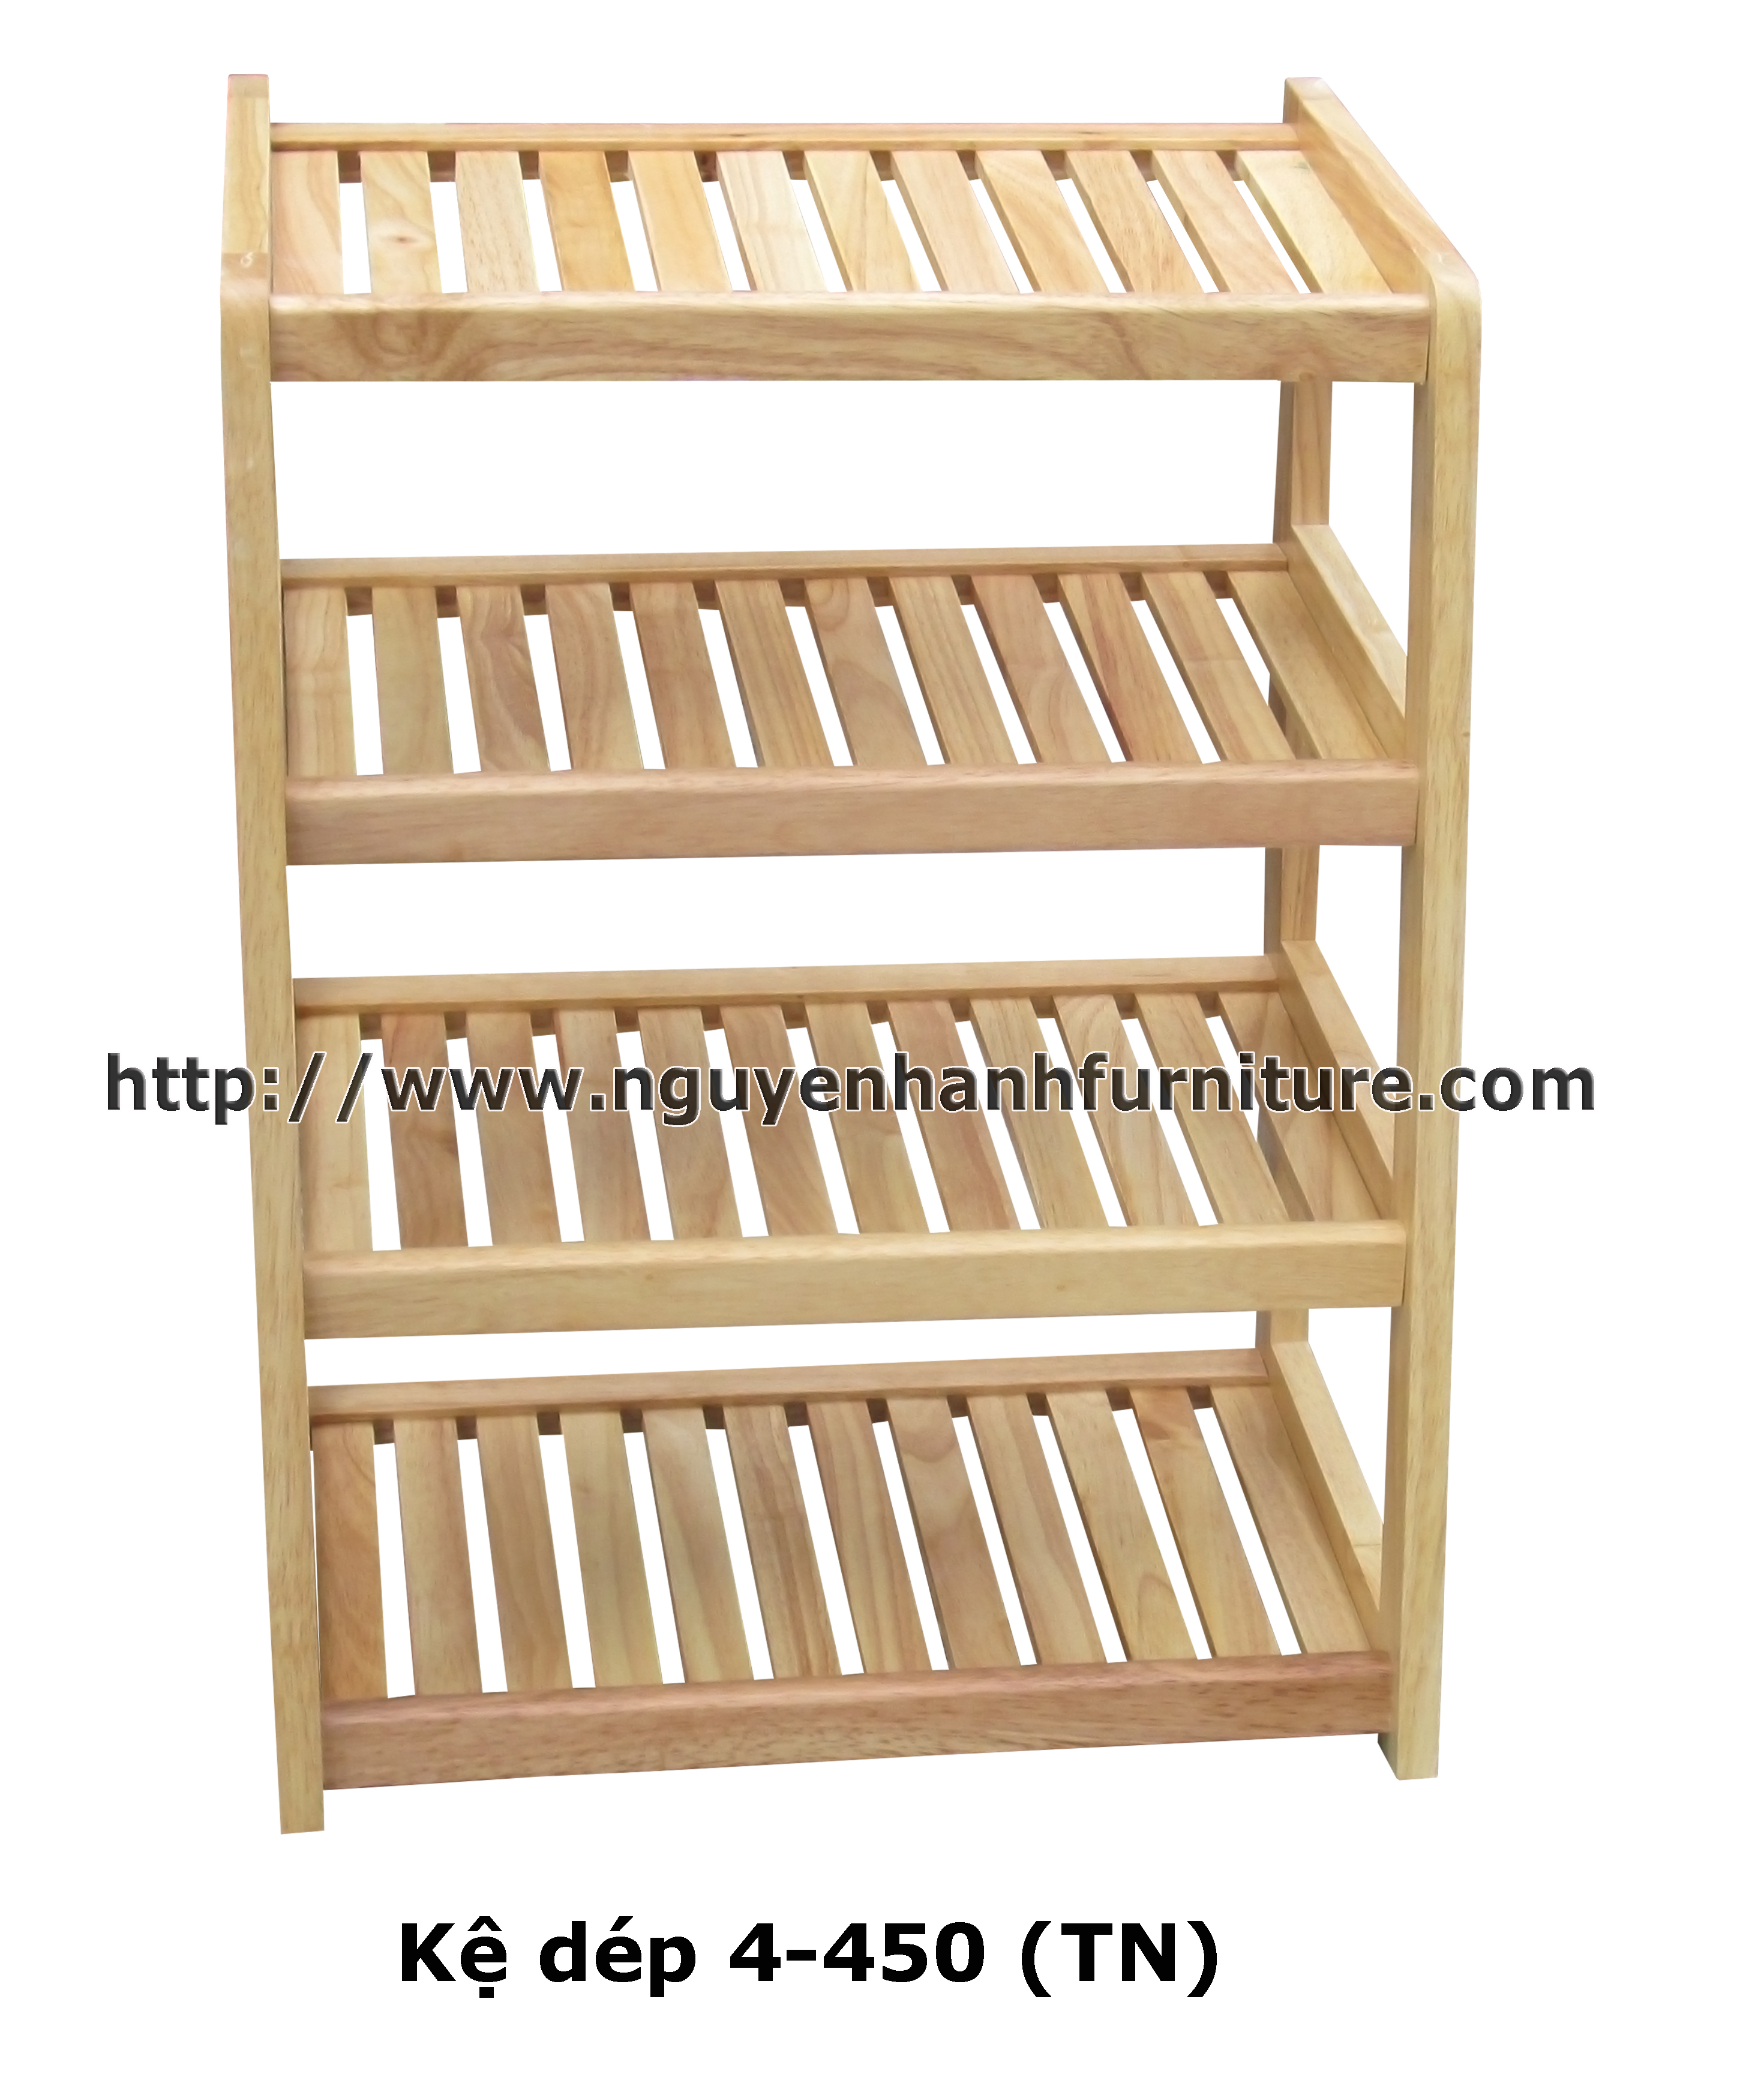 Name product: Shoeshelf 4 Floors 45 with sparse blades (Natural) - Dimensions: 45 x 30 x 62 (H) - Description: Wood natural rubber